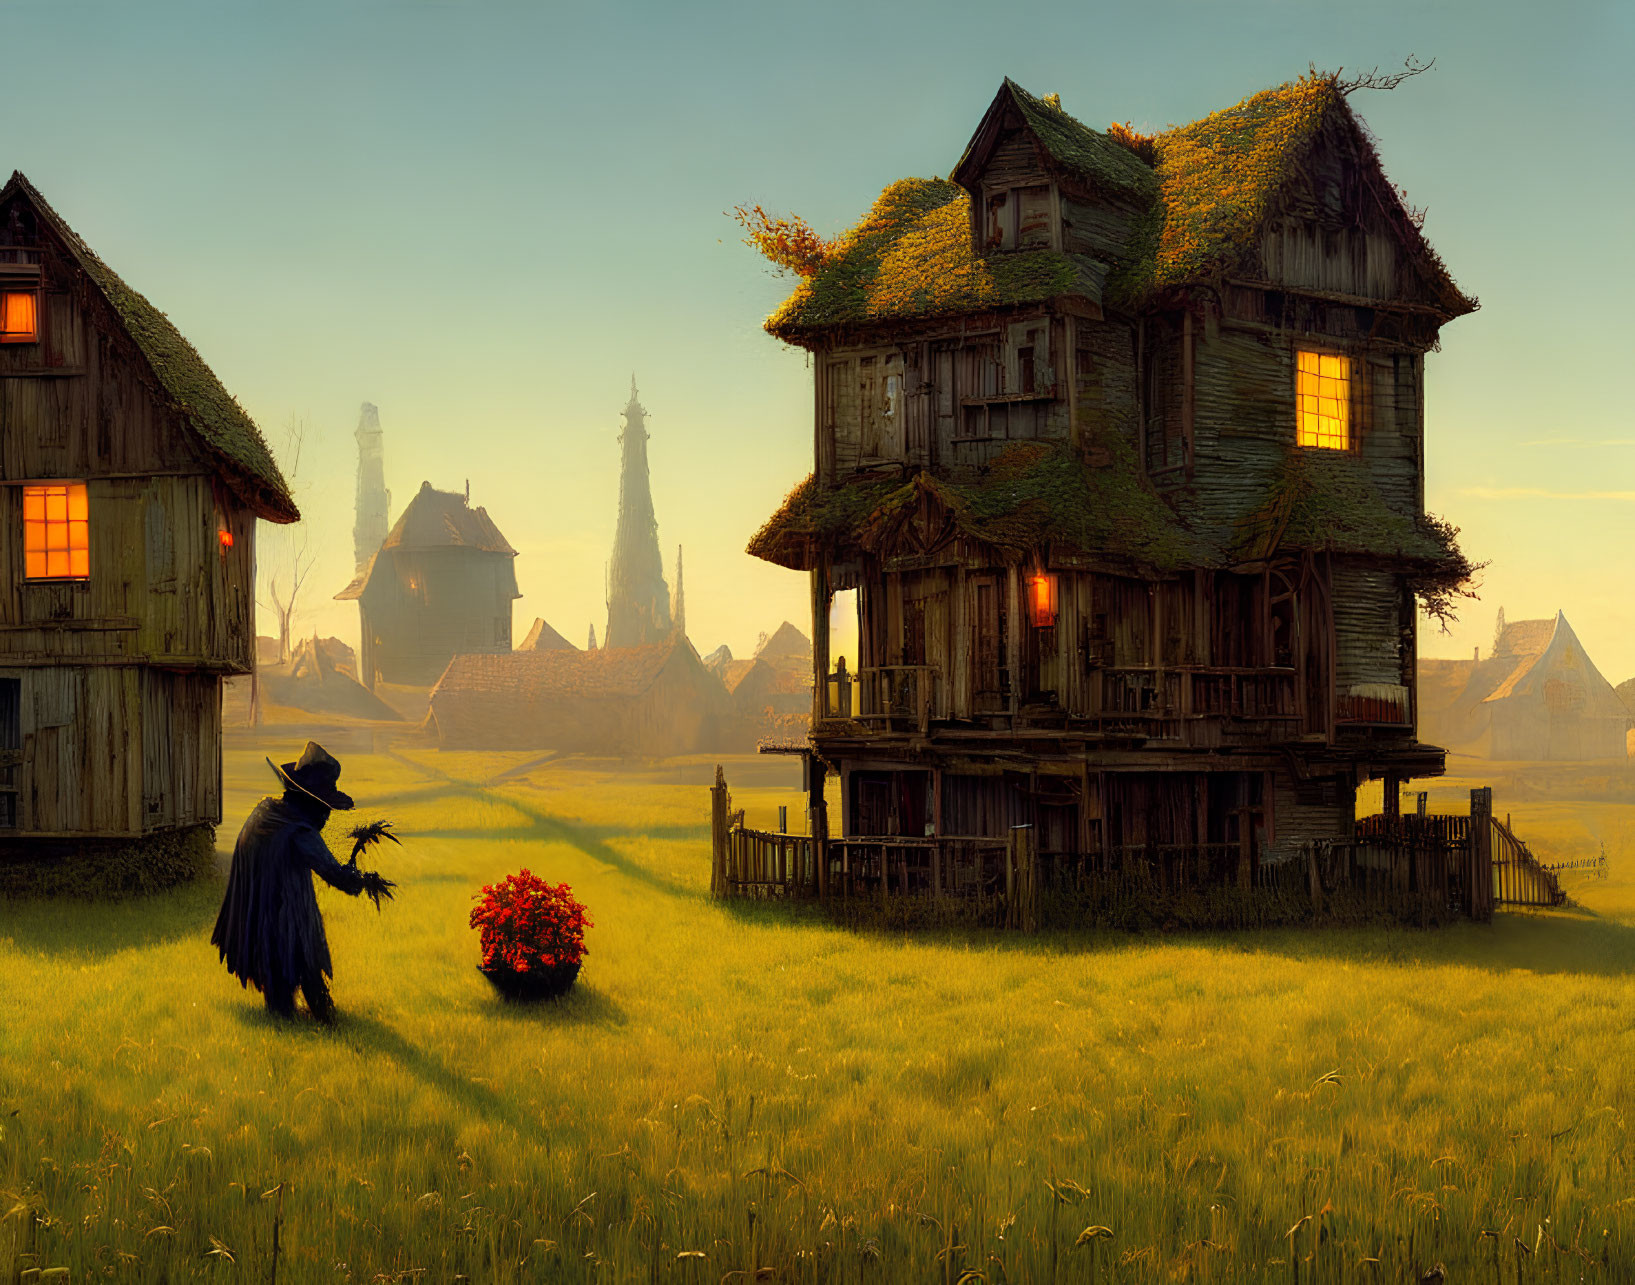 Cloaked figure by vibrant flowers, wooden houses, warm lights, industrial towers at sunset